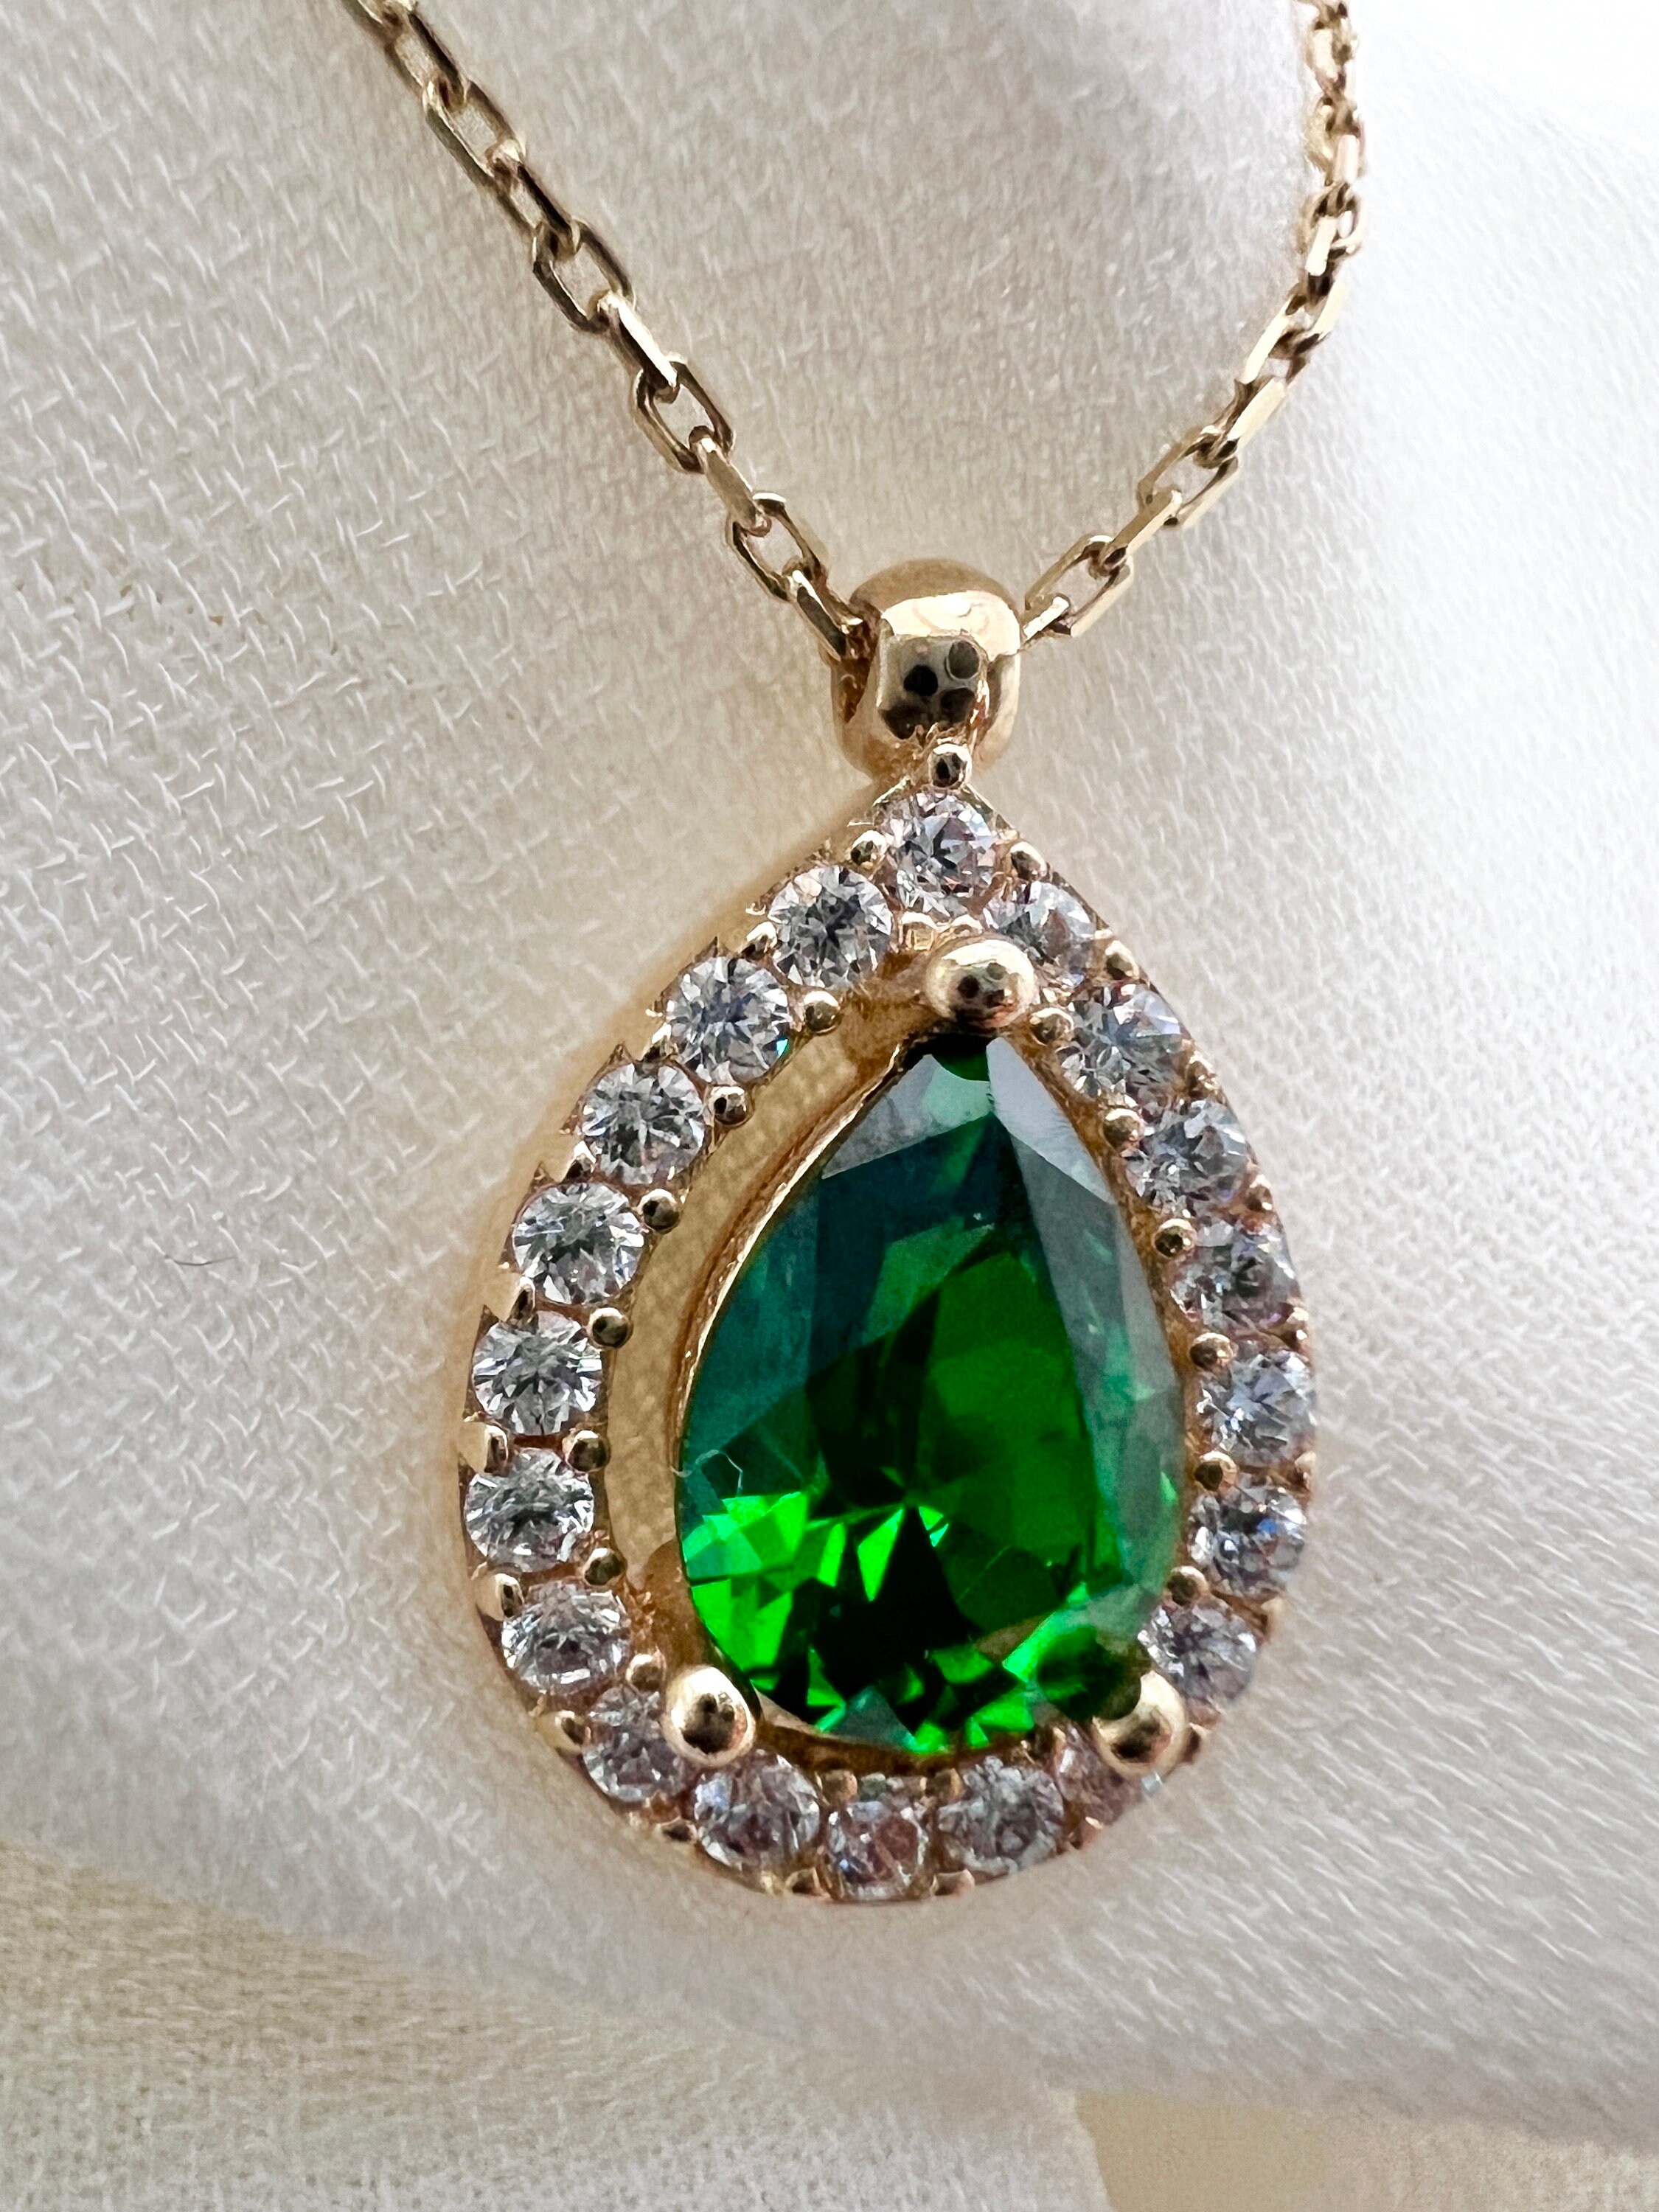 14k Gold Tear Drop Necklace, Dainty Green Emerald Pendant, Handcrafted ...